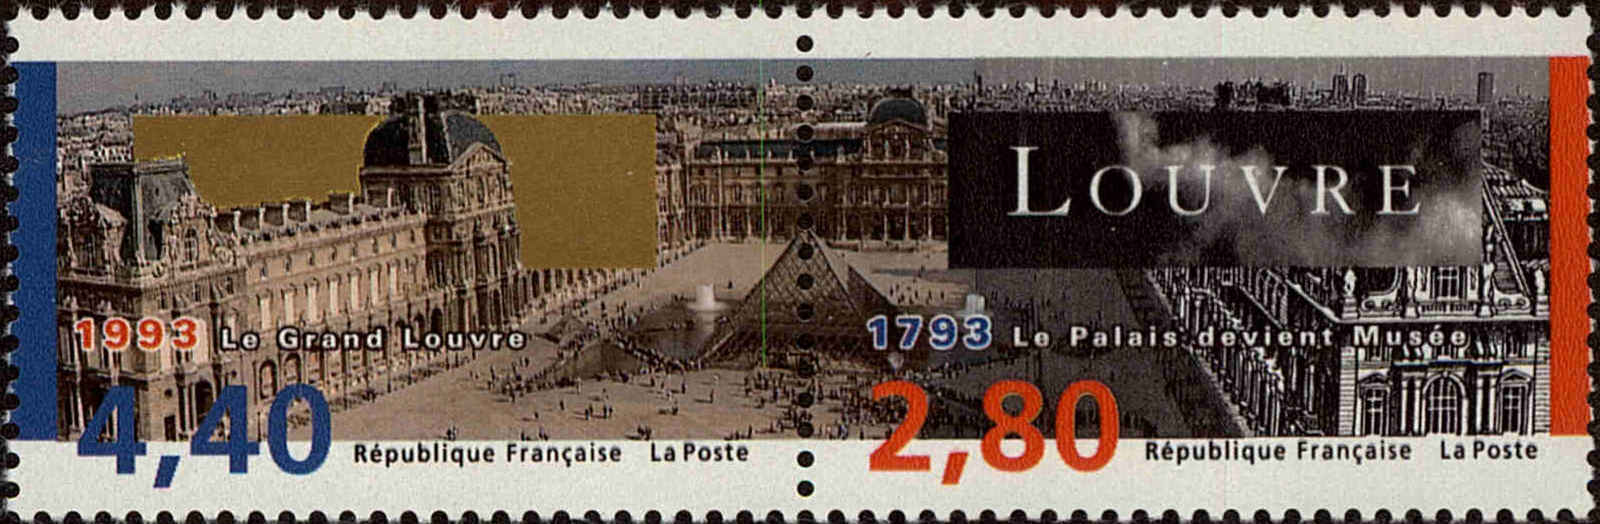 Front view of France 2397a collectors stamp